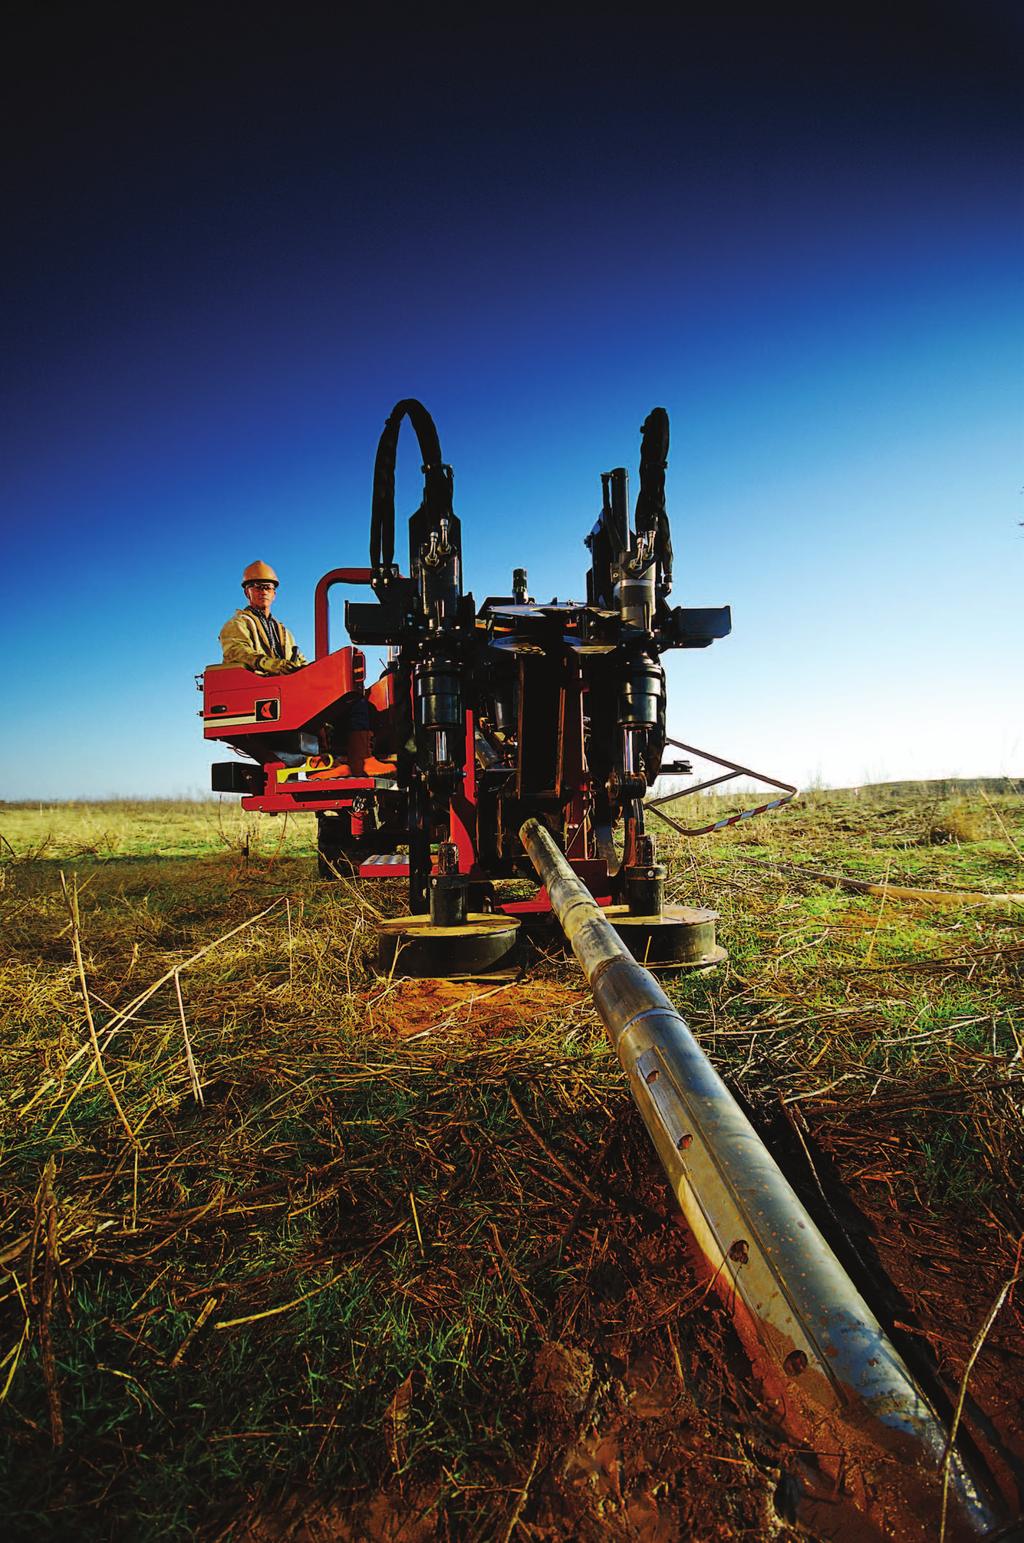 DITCH WITCH JT4020 All Terrain Directional Drill The JT4020 All Terrain HDD system can steer, drill and backream in just about any type of soil even solid rock up to 1000 feet.